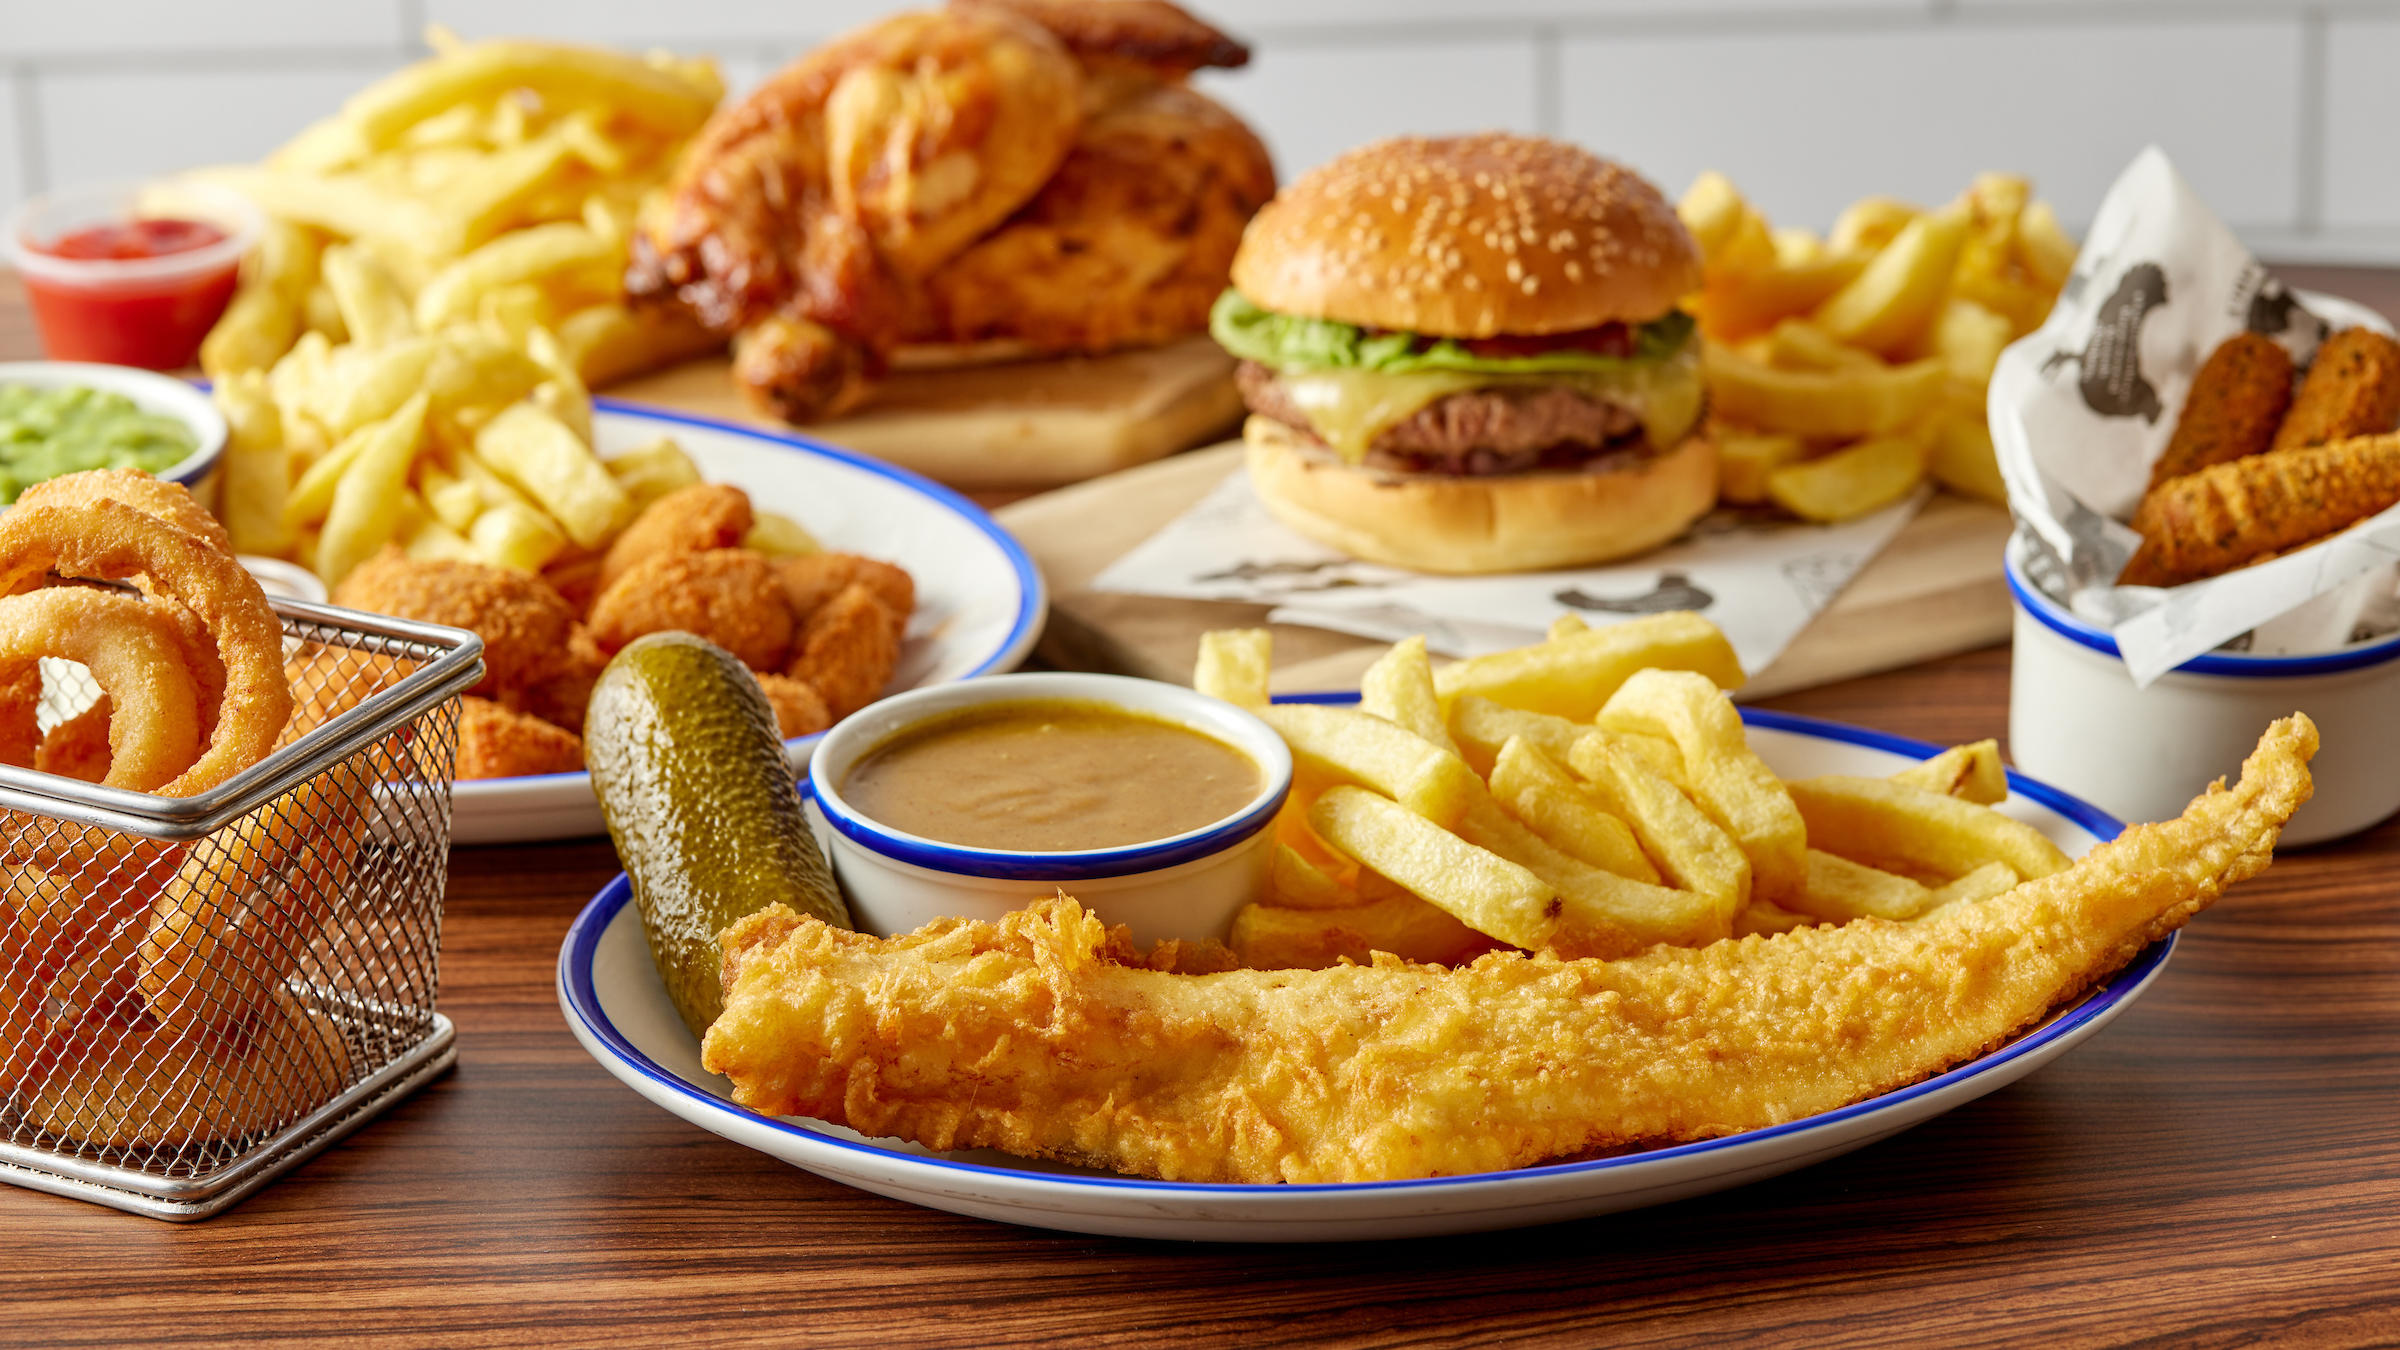 Enjoy Churchills fish and chips your way! Order click & collect through our simple online ordering w Churchill's Fish & Chips Fleet Fleet 01252 612114